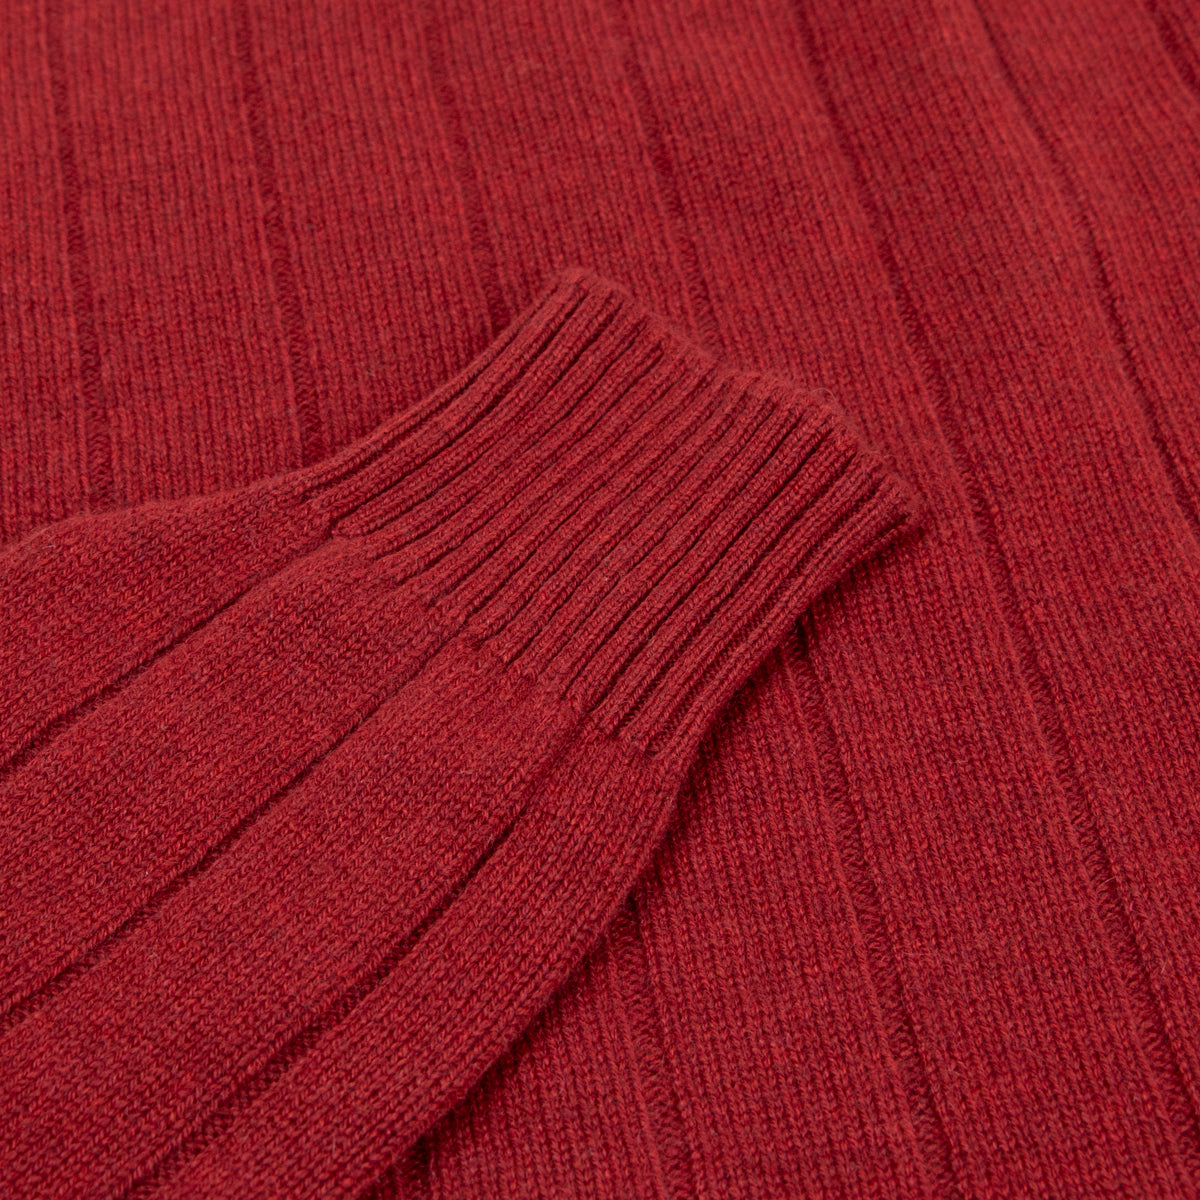 The Wellington Cashmere Ribbed Zip Neck Sweater - Russet Red / Cosmos  Robert Old   